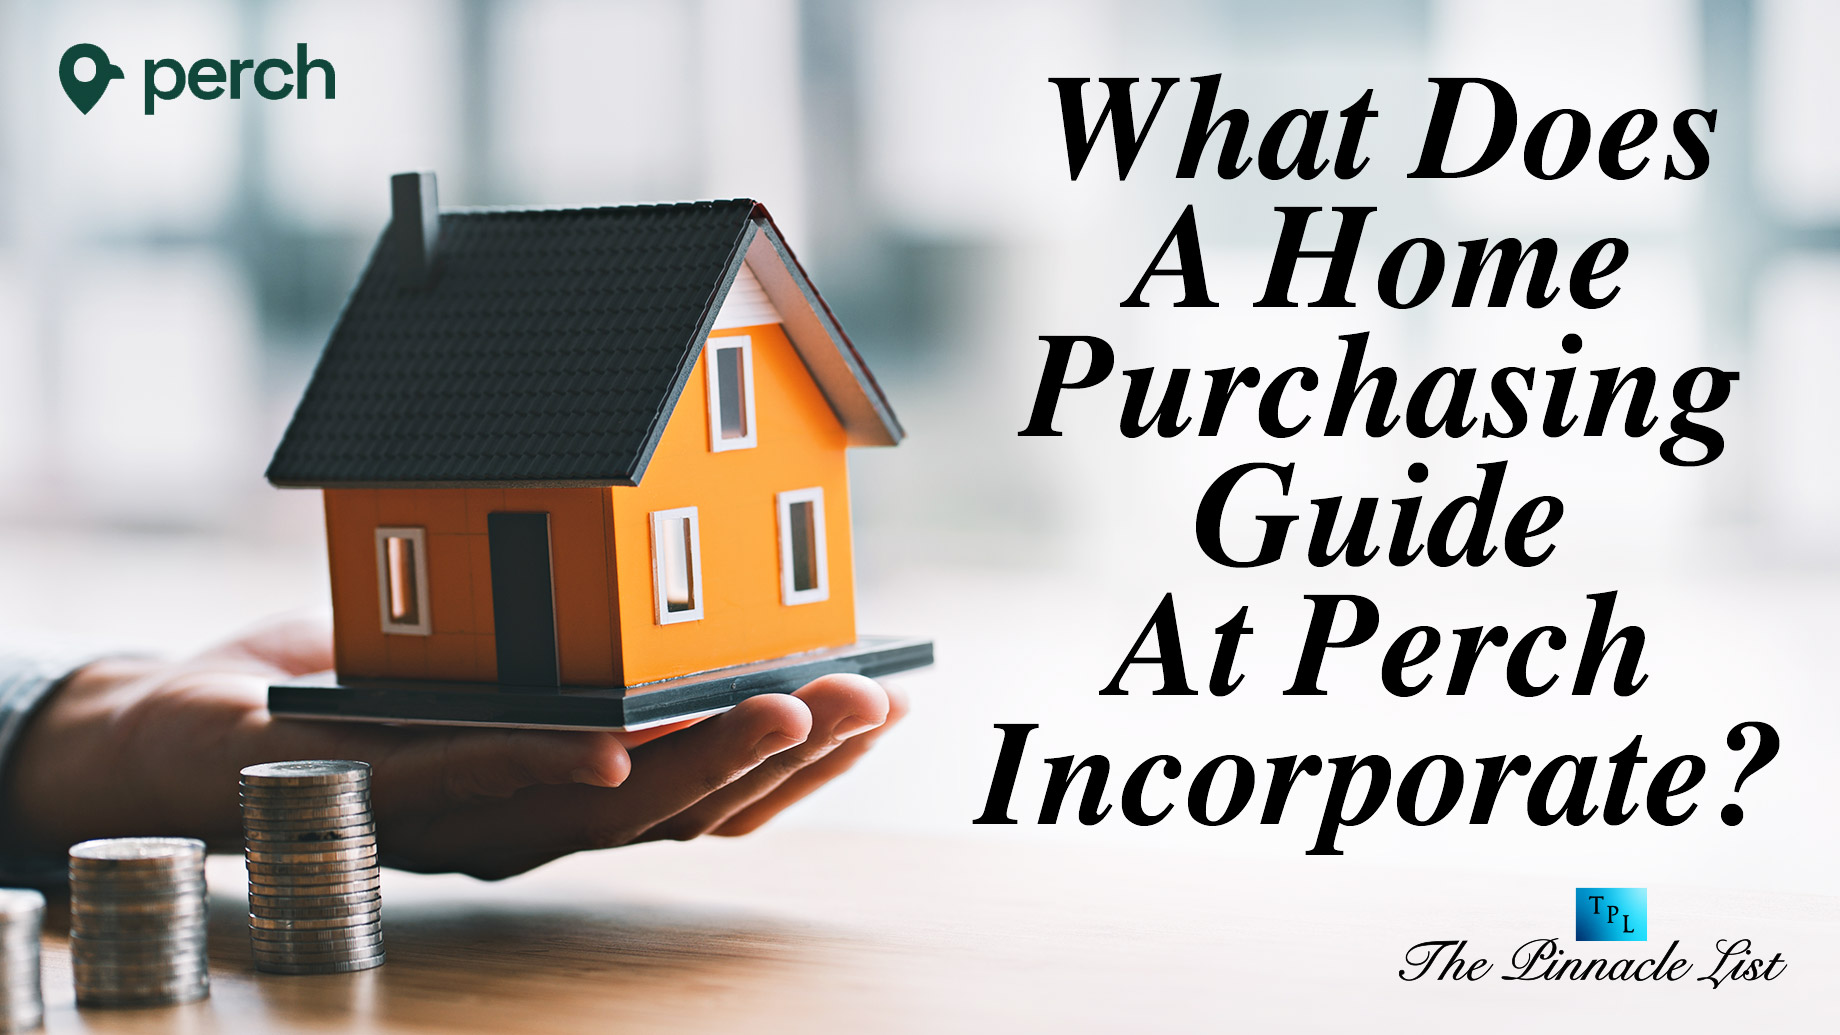 What Does A Home Purchasing Guide At Perch Incorporate?